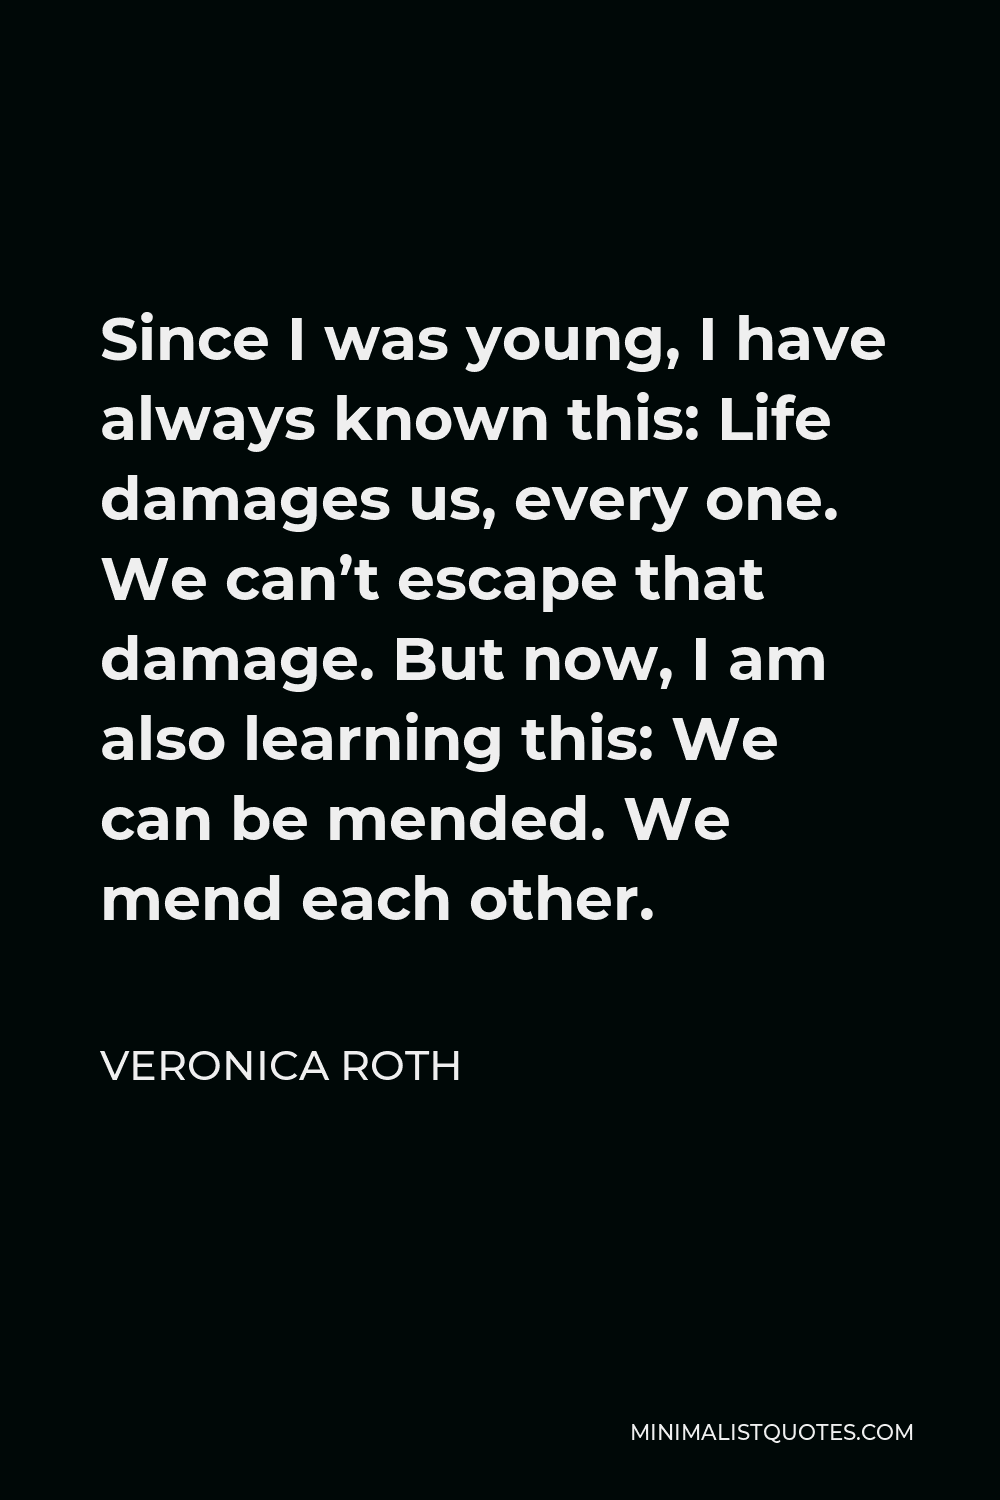 Veronica Roth Quote - Since I was young, I have always known this: Life damages us, every one. We can’t escape that damage. But now, I am also learning this: We can be mended. We mend each other.